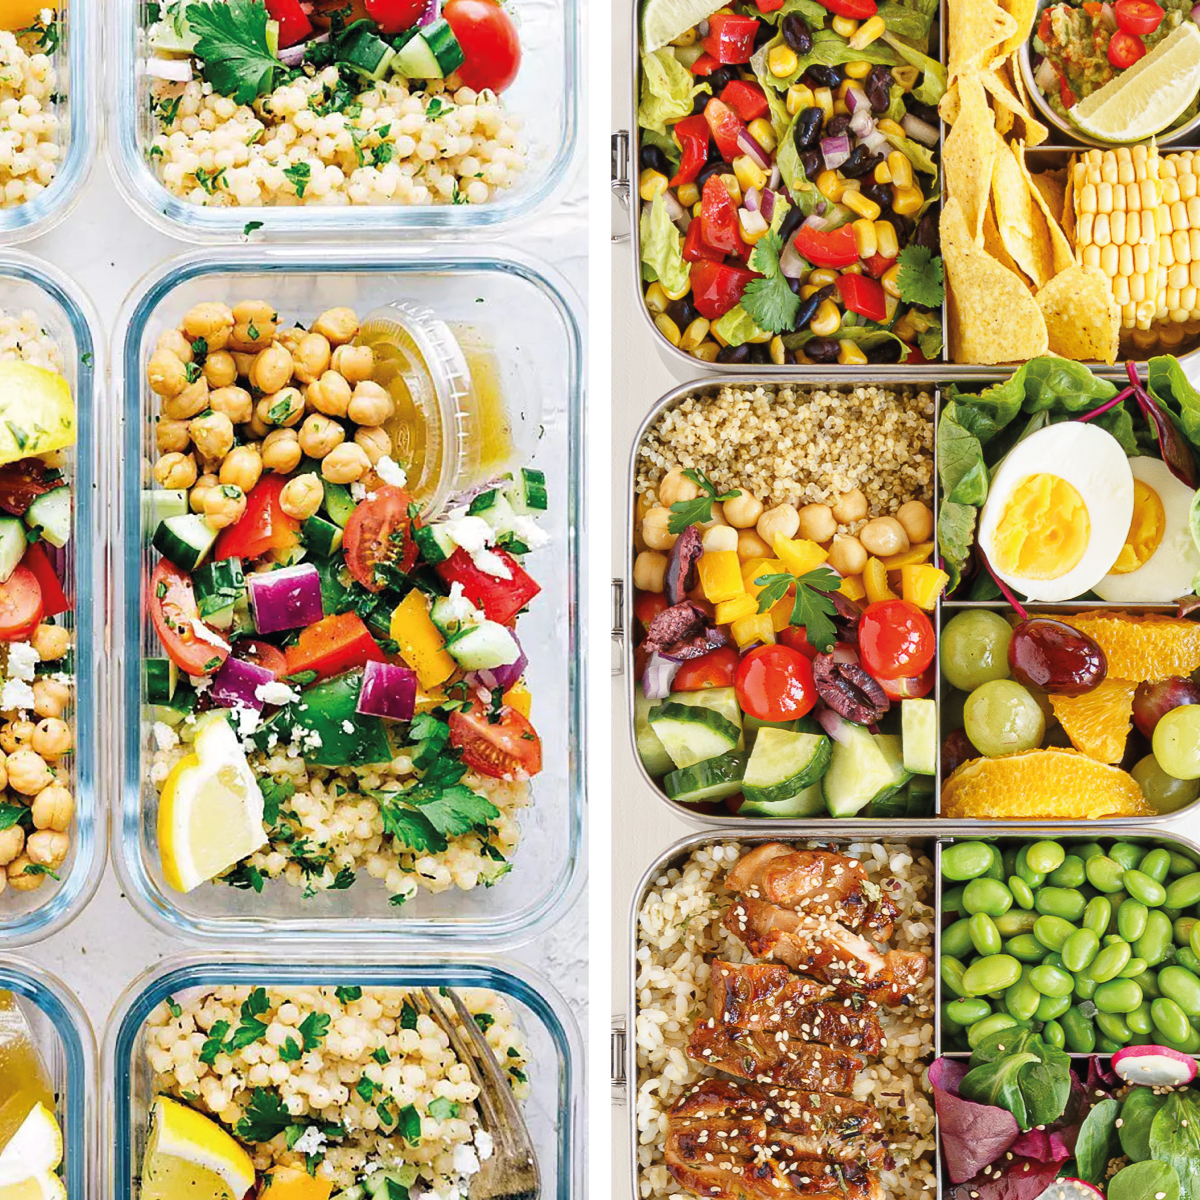 50+ Healthy Meal Prep Ideas To Simplify Your Life